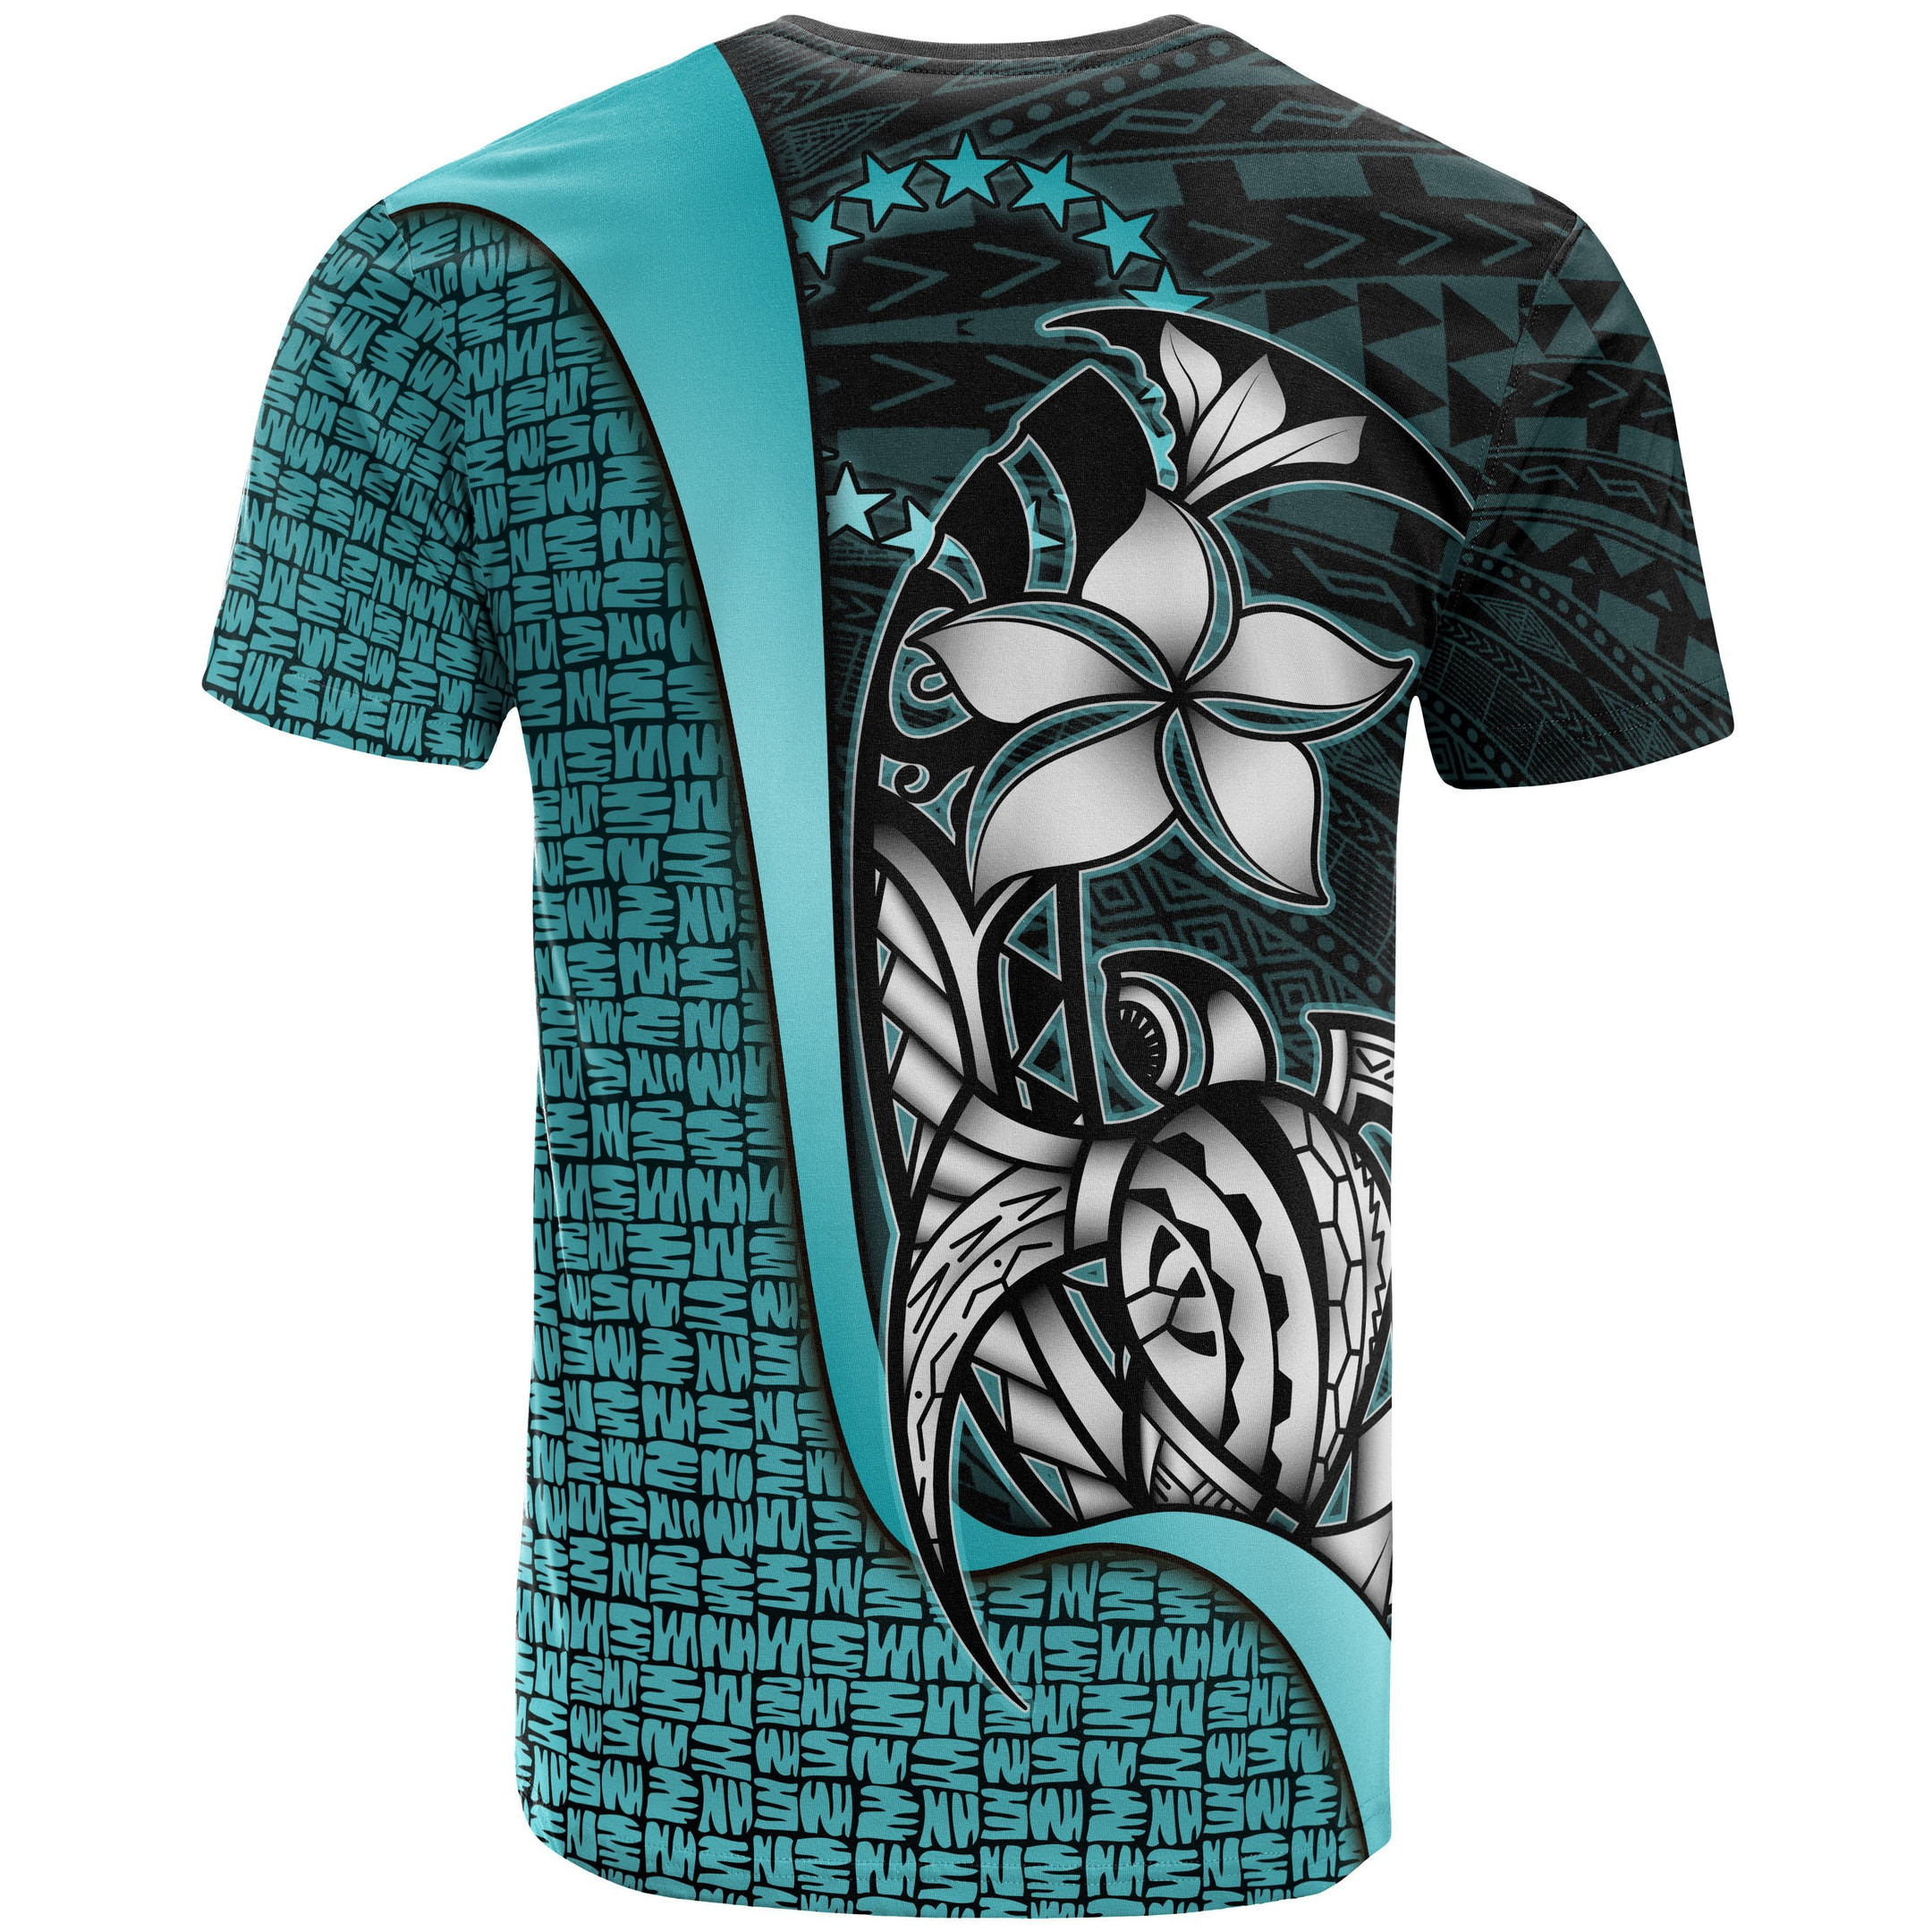 Cook Islands Polynesian Custom Personalised T-Shirt Turquoise - Turtle with Hook